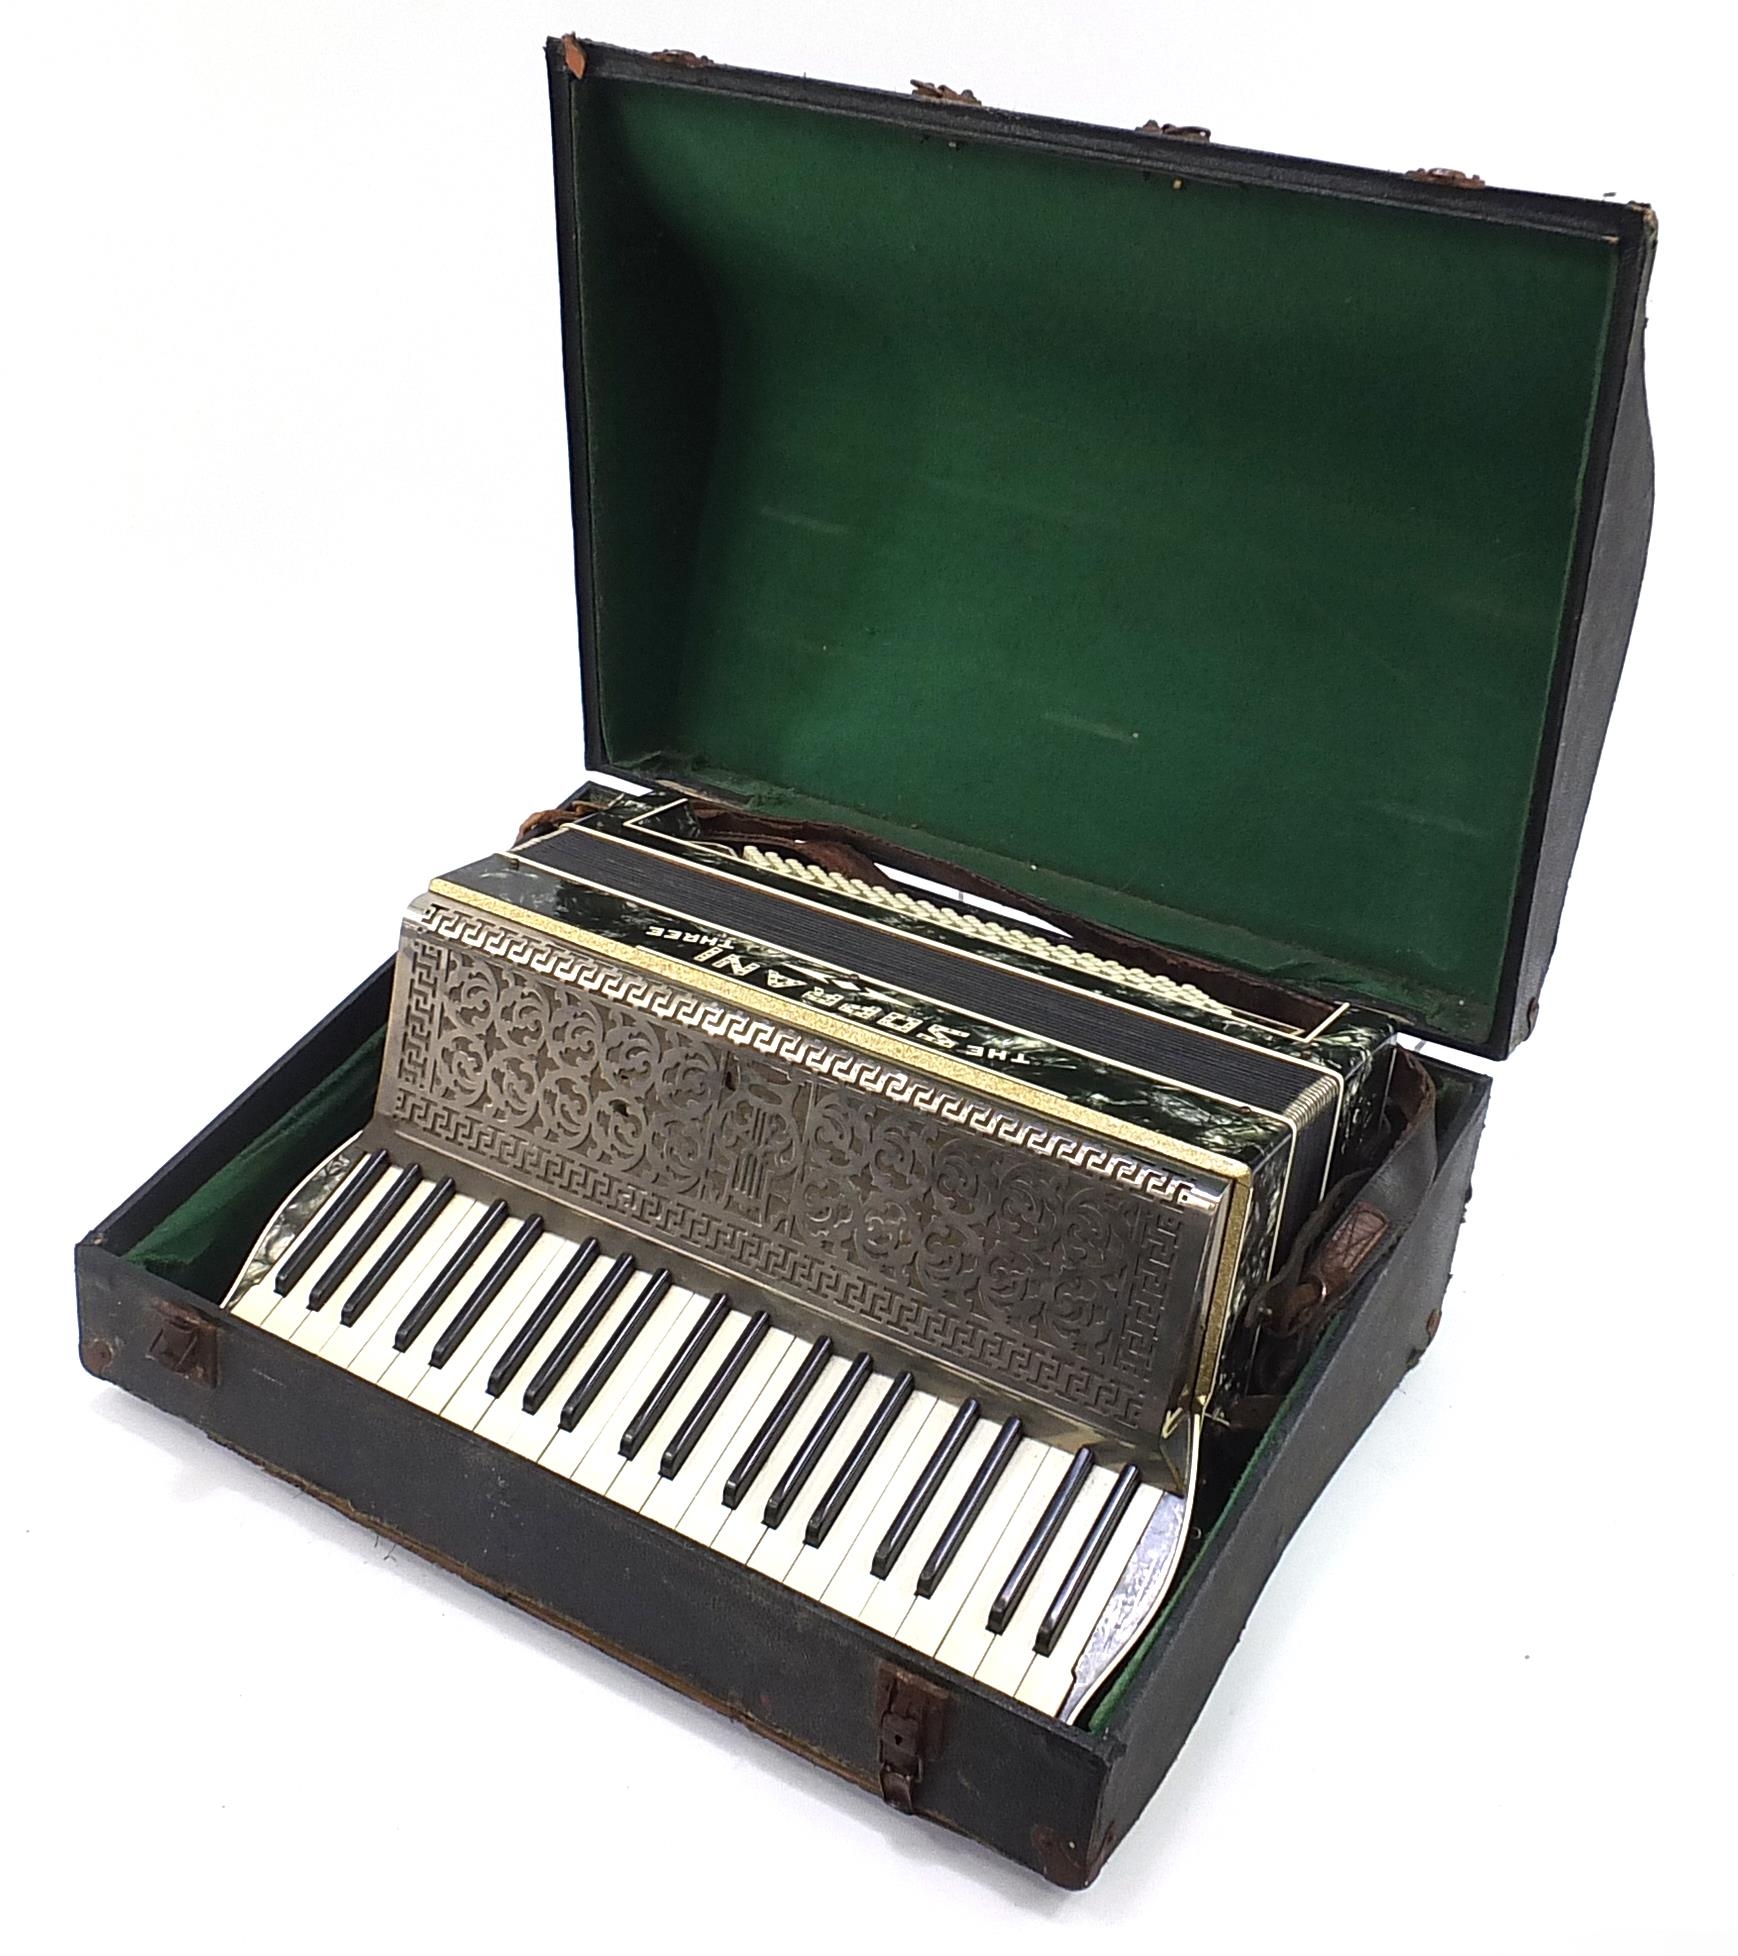 The Soprani Three Italian mother of pearl design accordion housed in protective case, 51.5cm wide - Image 3 of 5